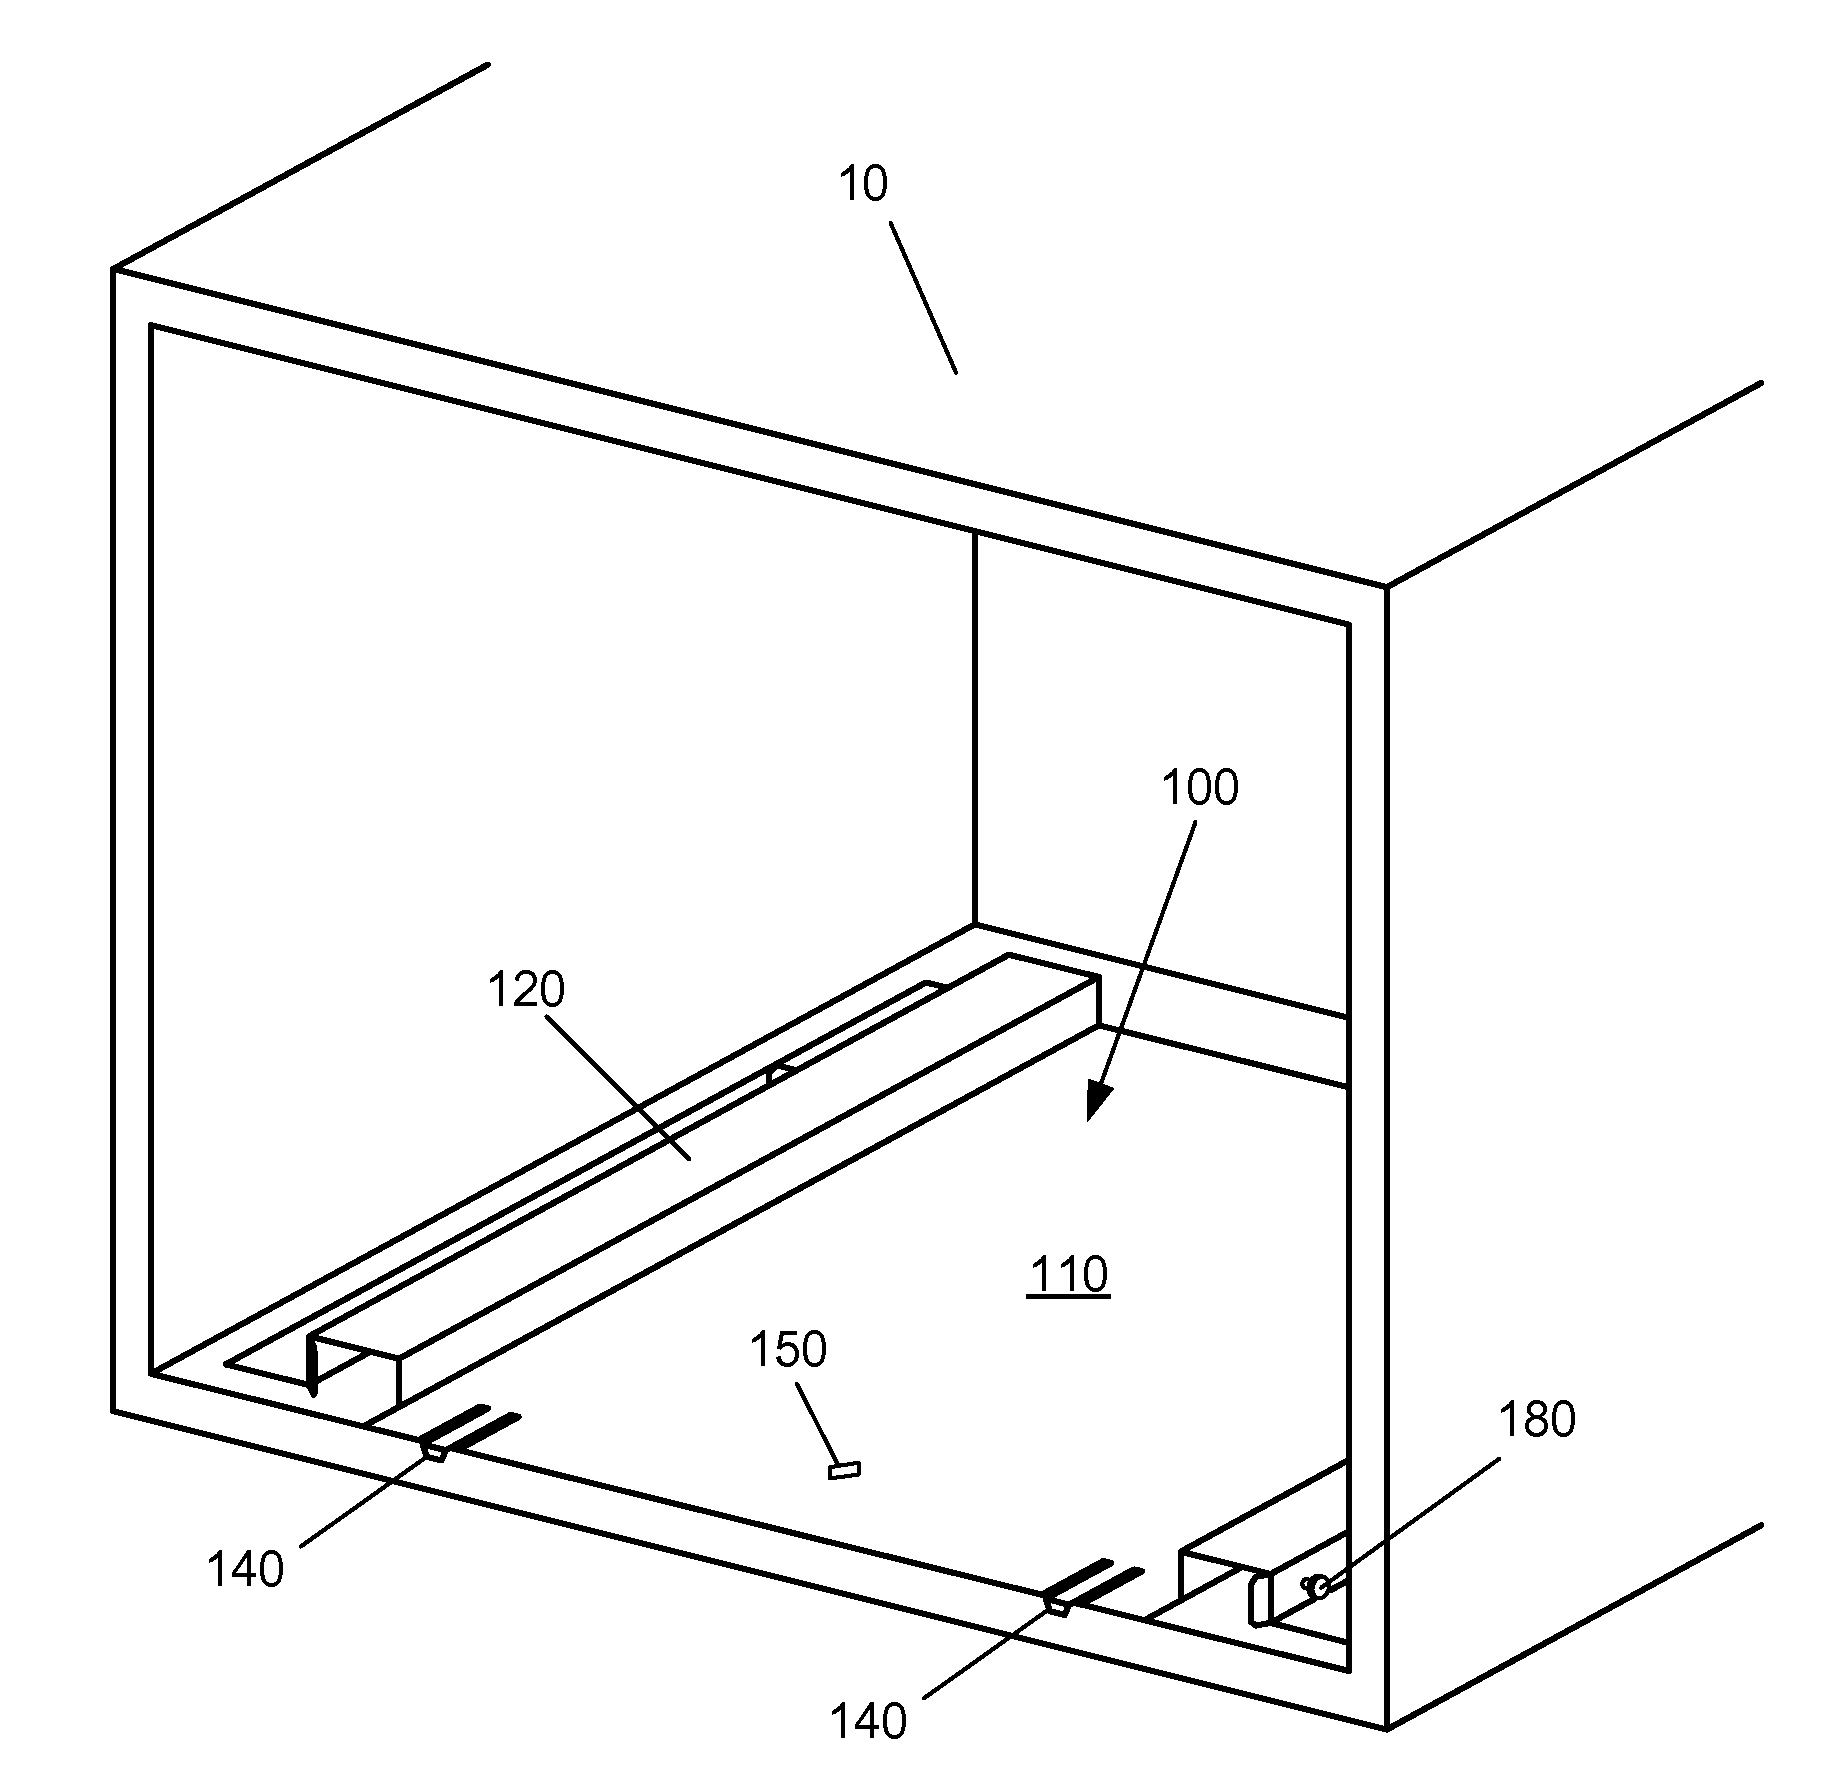 Attachment rail system for household appliance